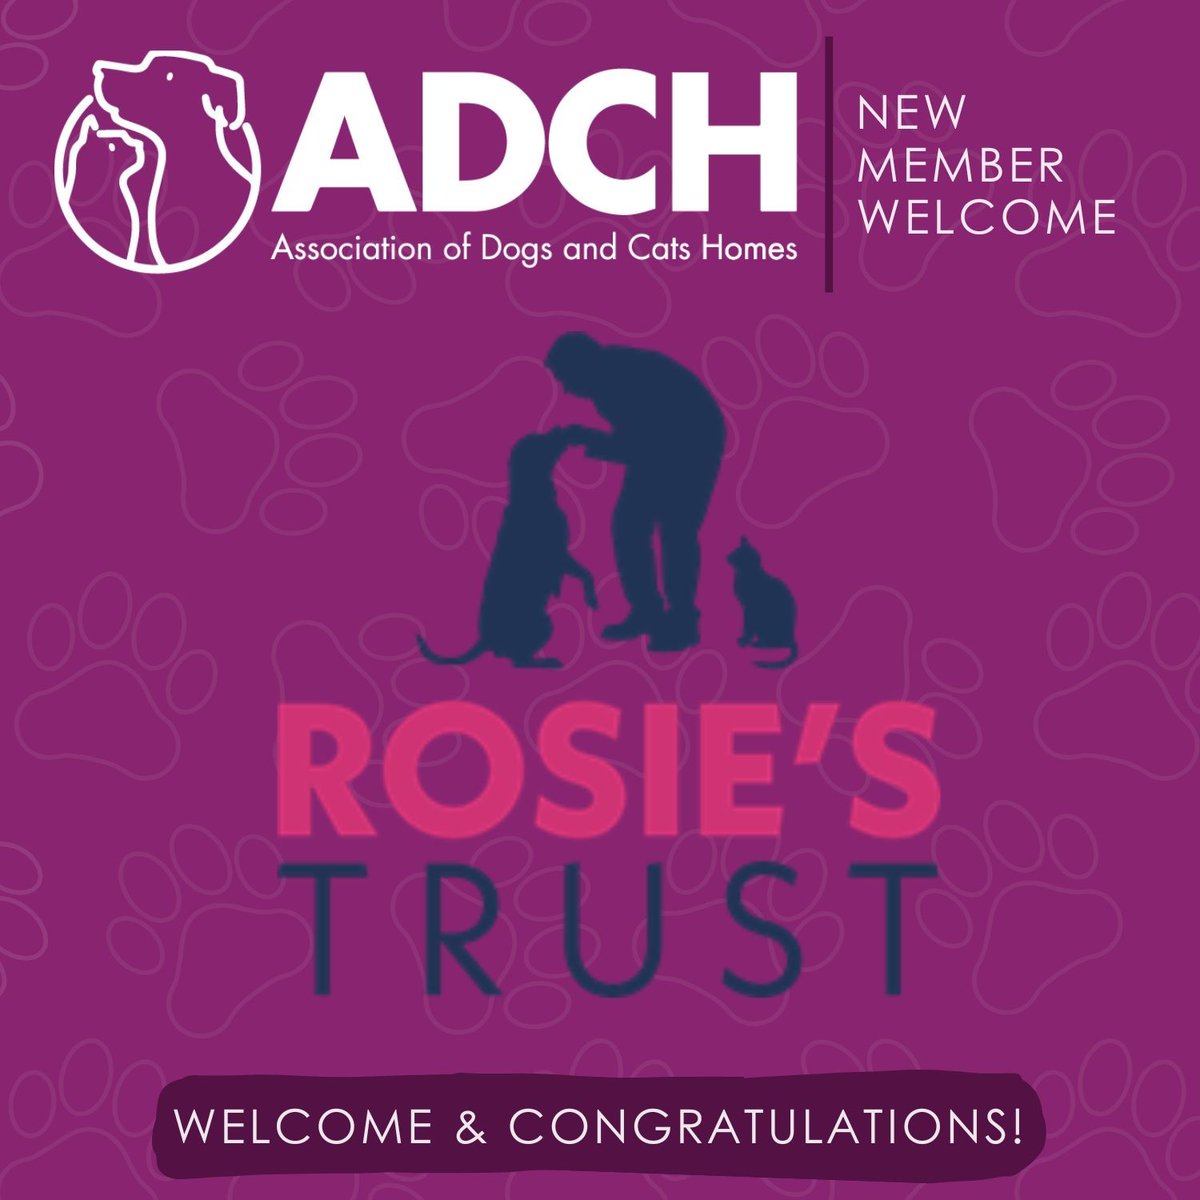 New ADCH Member alert!🎉 We are super excited to welcome @rosiestrust as a new Full ADCH Member, following their recent external assessment. Huge congratulations and a warm welcome to our ADCH community💜 You can read more about them here➡️ buff.ly/49zdp8S